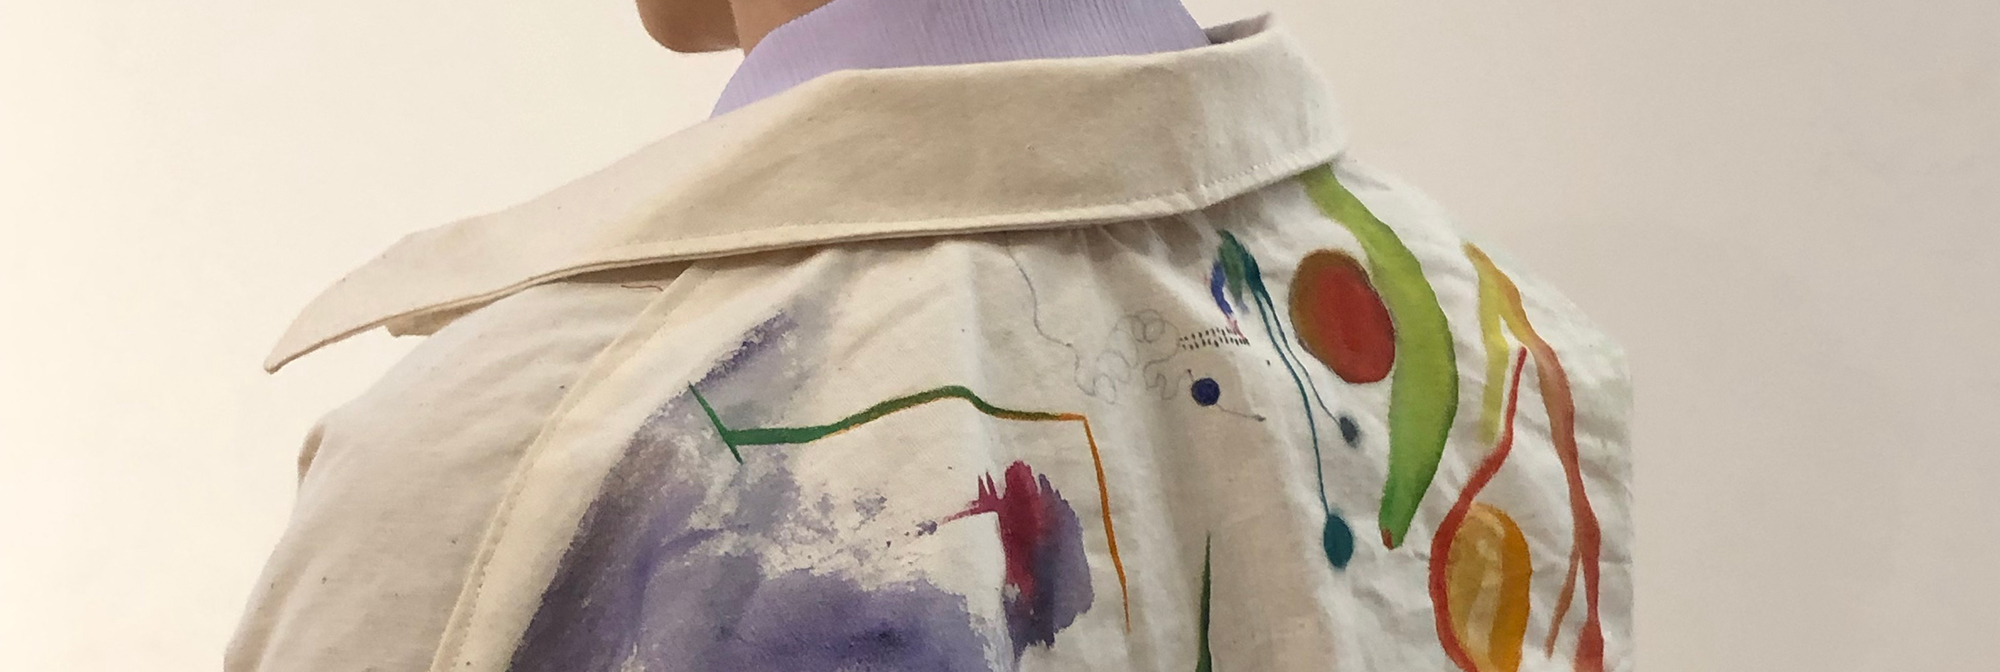 The view of a woman's back wearing a white jumpsuit which has been painted with Bauhaus-inspired designs, to be worn during the Bauhaus 100 performances in September 2019.